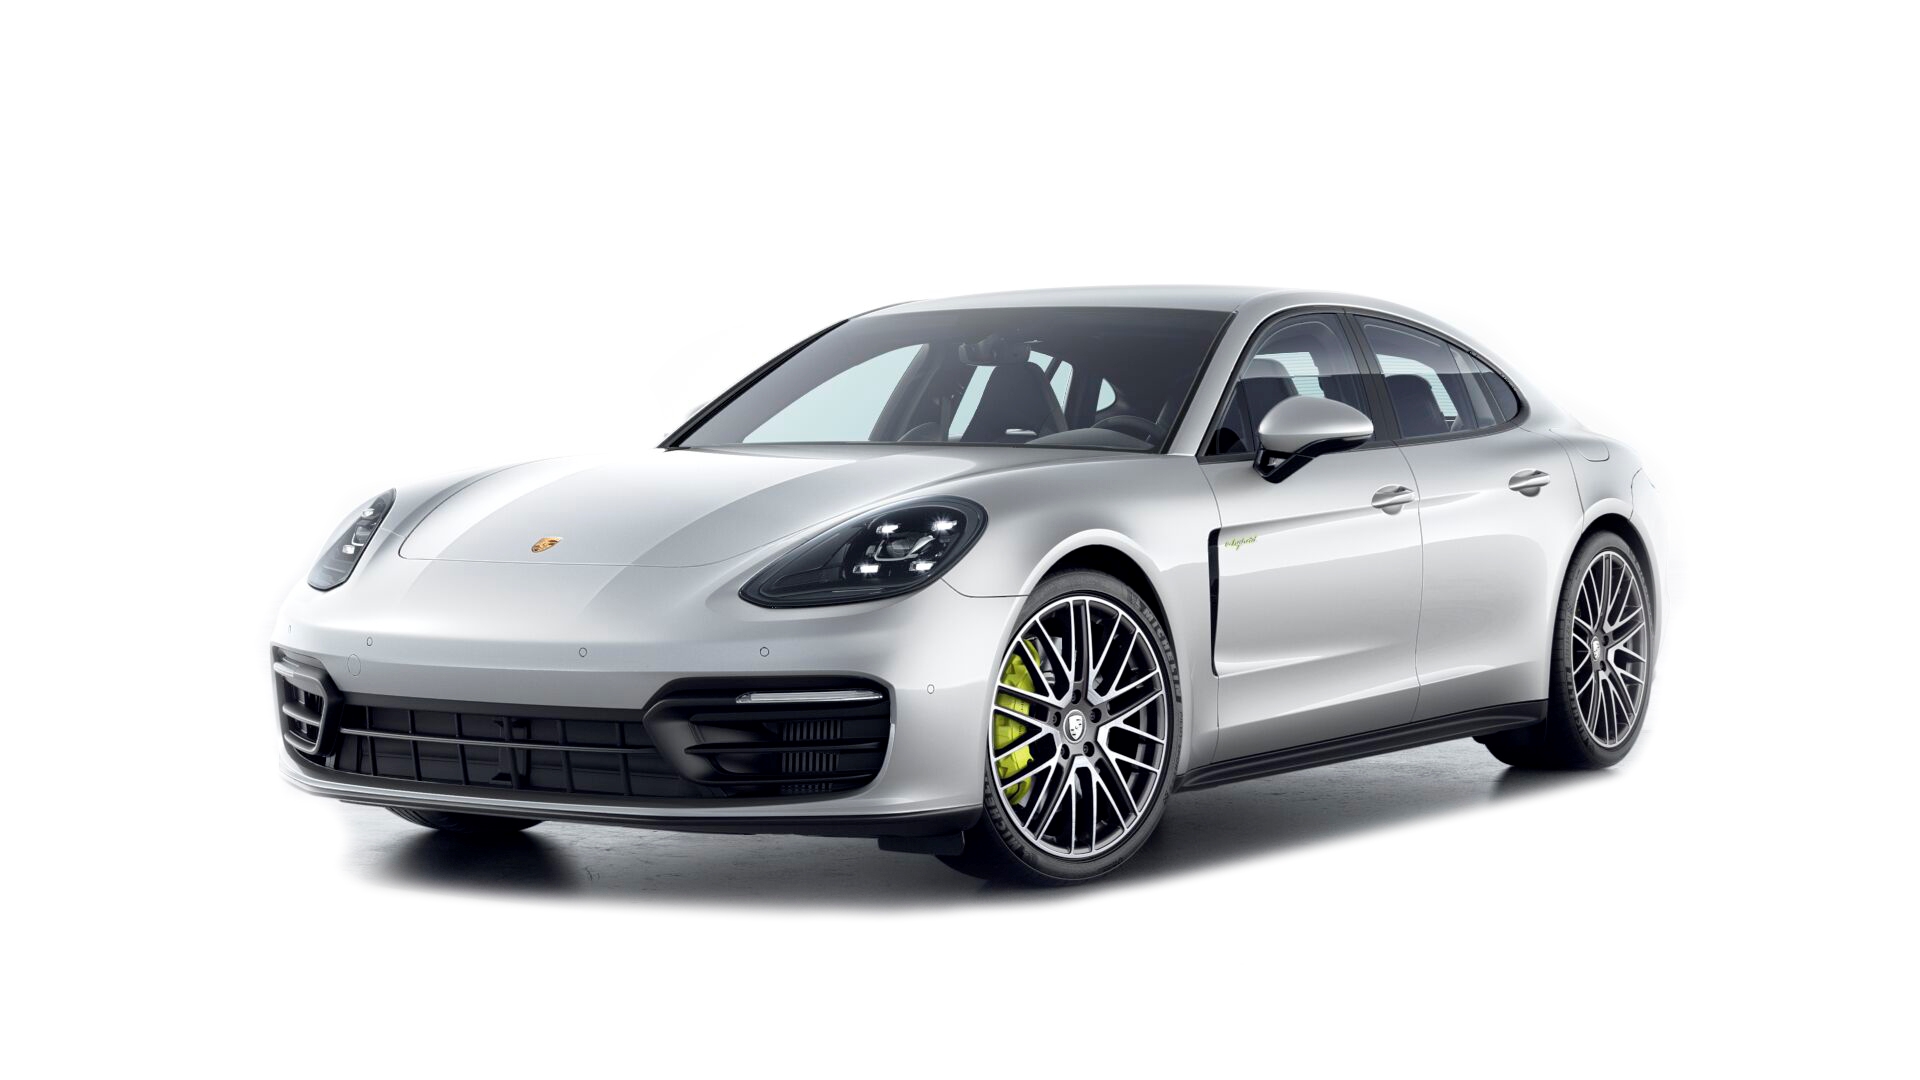 2022 Porsche Panamera 4S EHybrid Full Specs, Features and